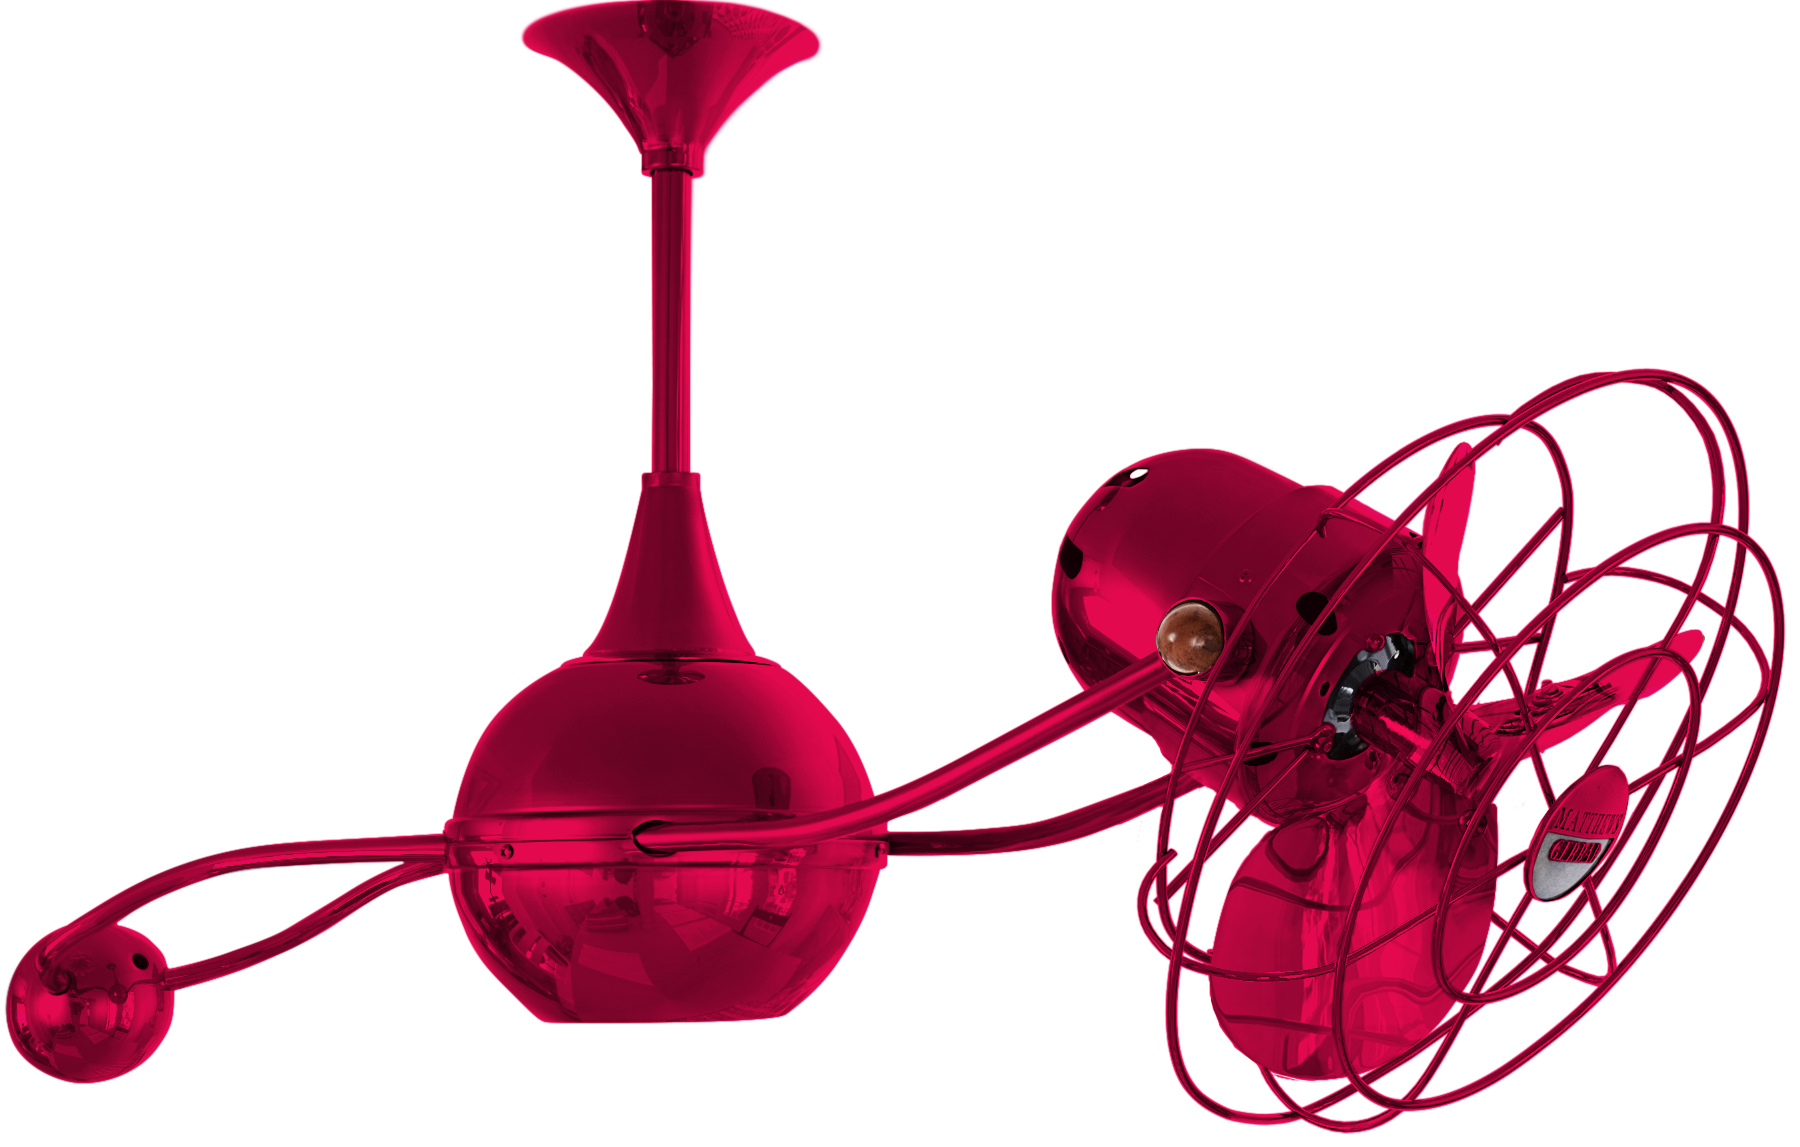 Brisa 2000 ceiling fan in red / rubi finish with metal blades in decorative cage made by Matthews Fan Company.